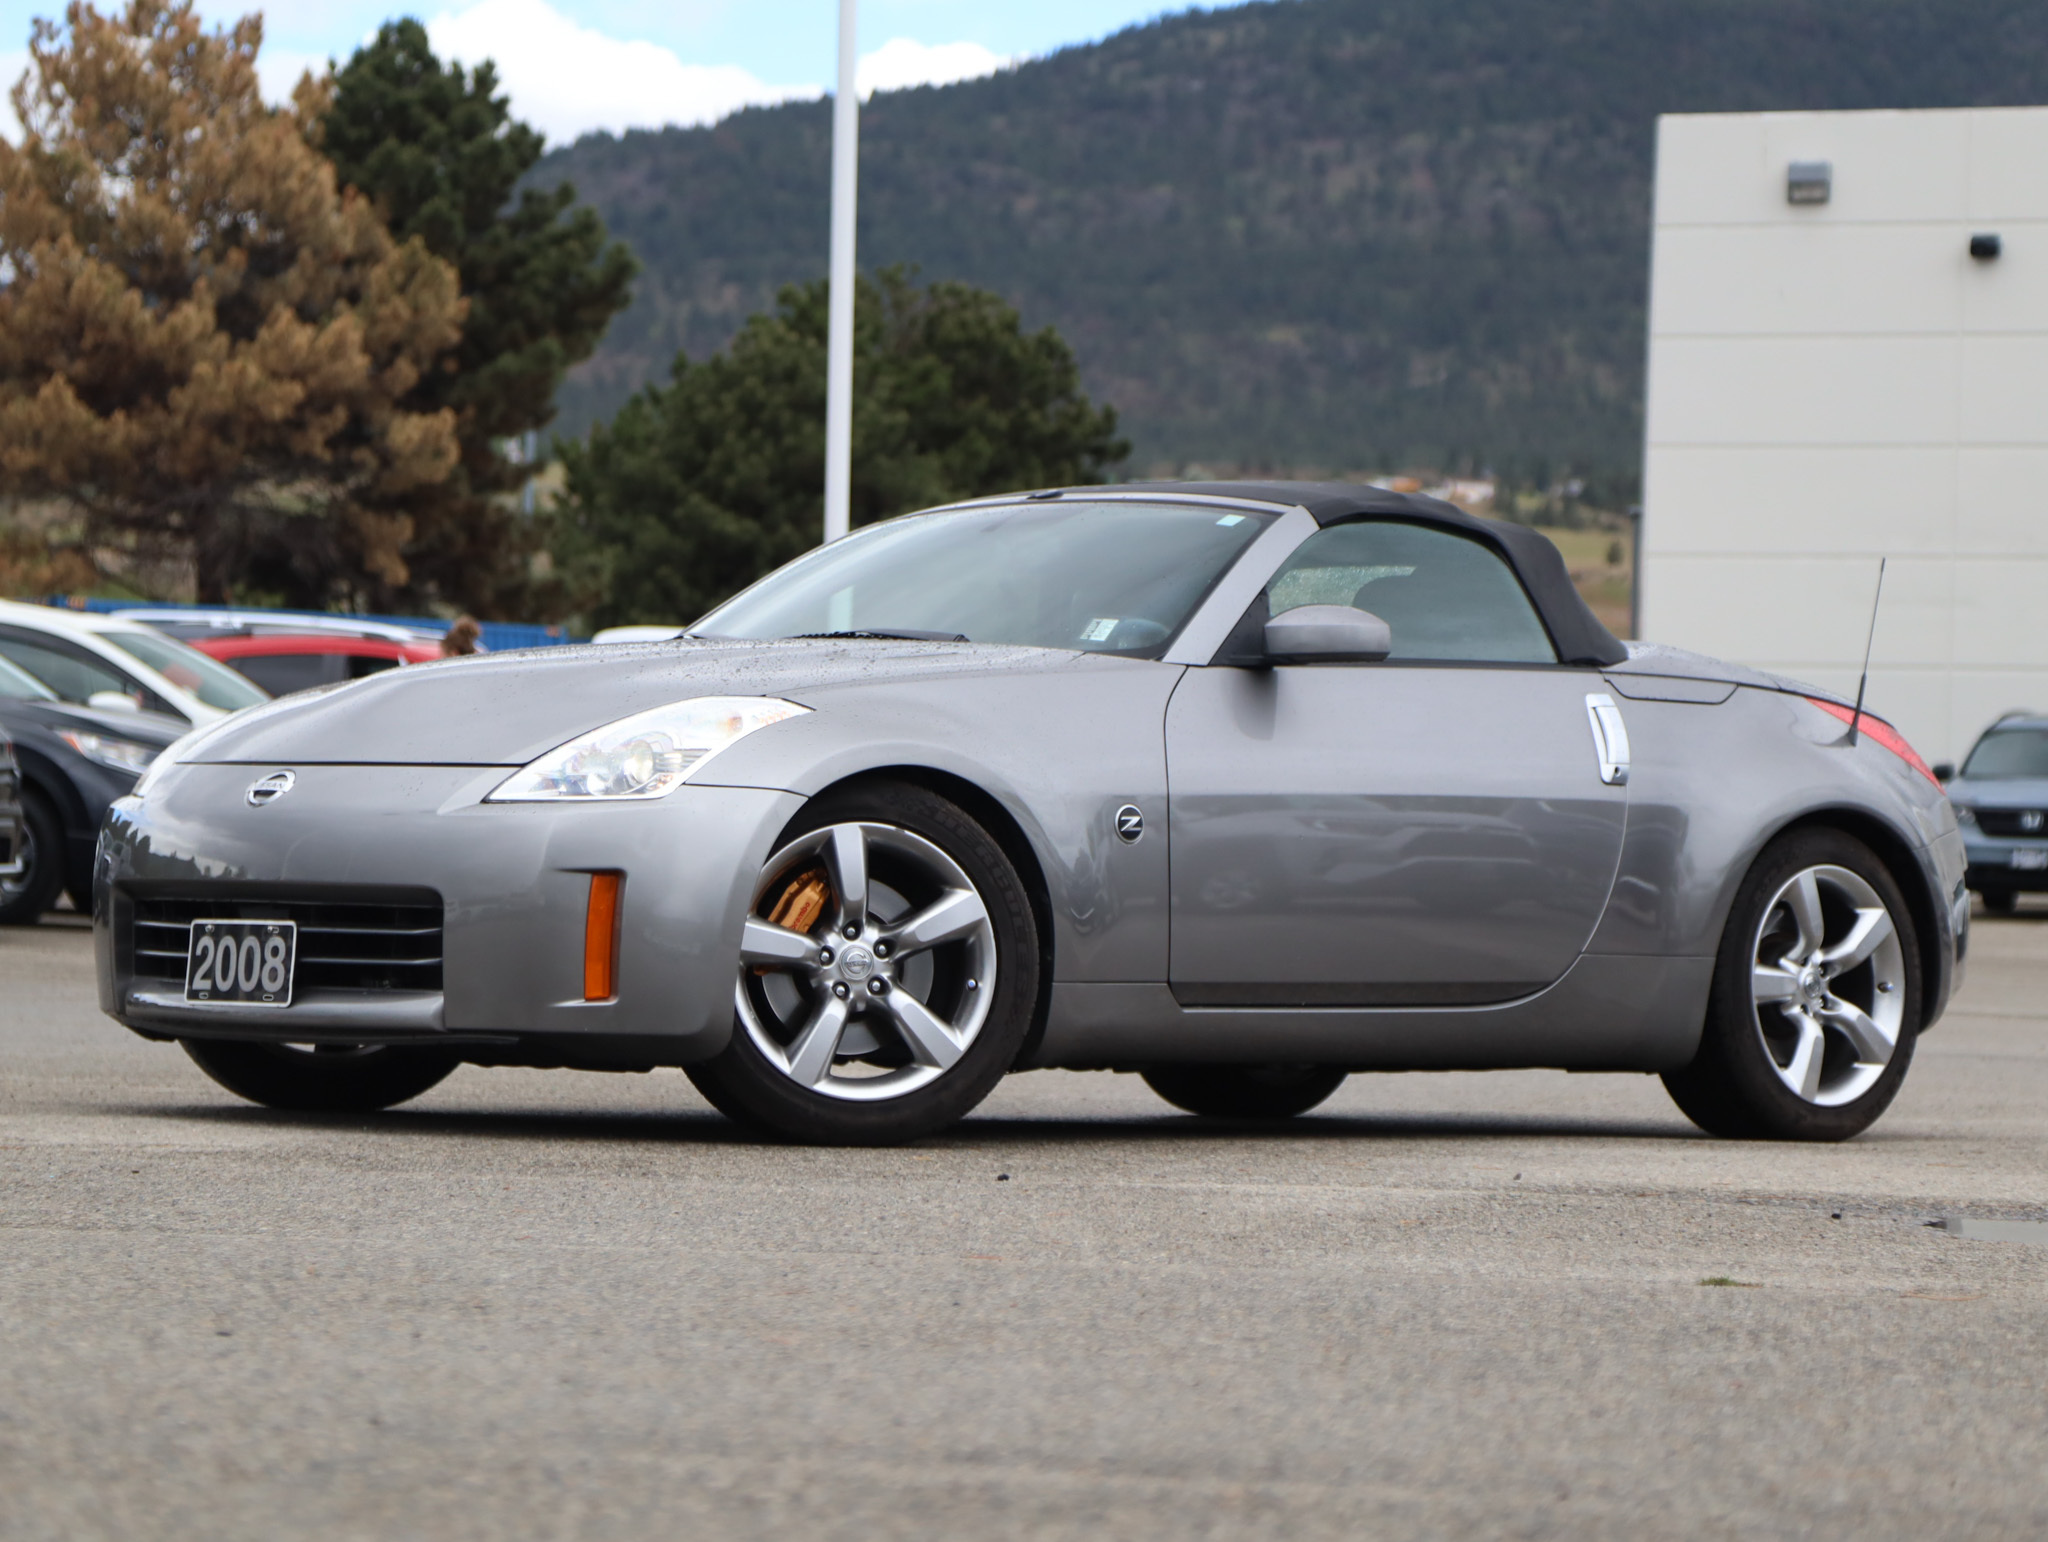 2008 Nissan 350Z Grand Touring - Heated Front Seats / RWD